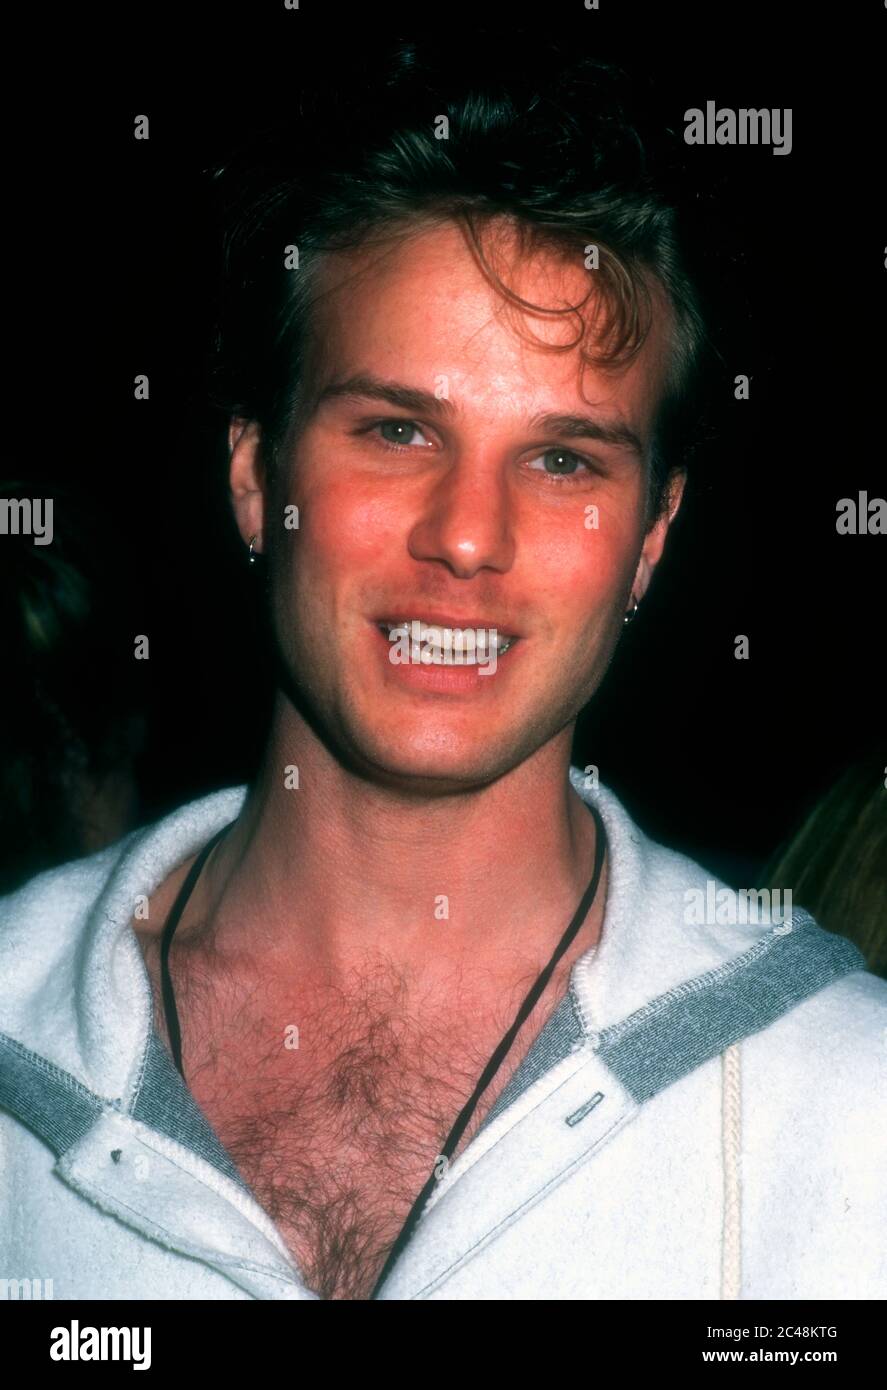 westwood-california-usa-9th-november-1995-actor-james-marshall-attends-miramax-the-crossing-guard-premiere-on-november-9-1995-at-mann-national-theatre-in-westwood-california-usa-photo-by-barry-kingalamy-stock-photo-2C48KTG.jpg